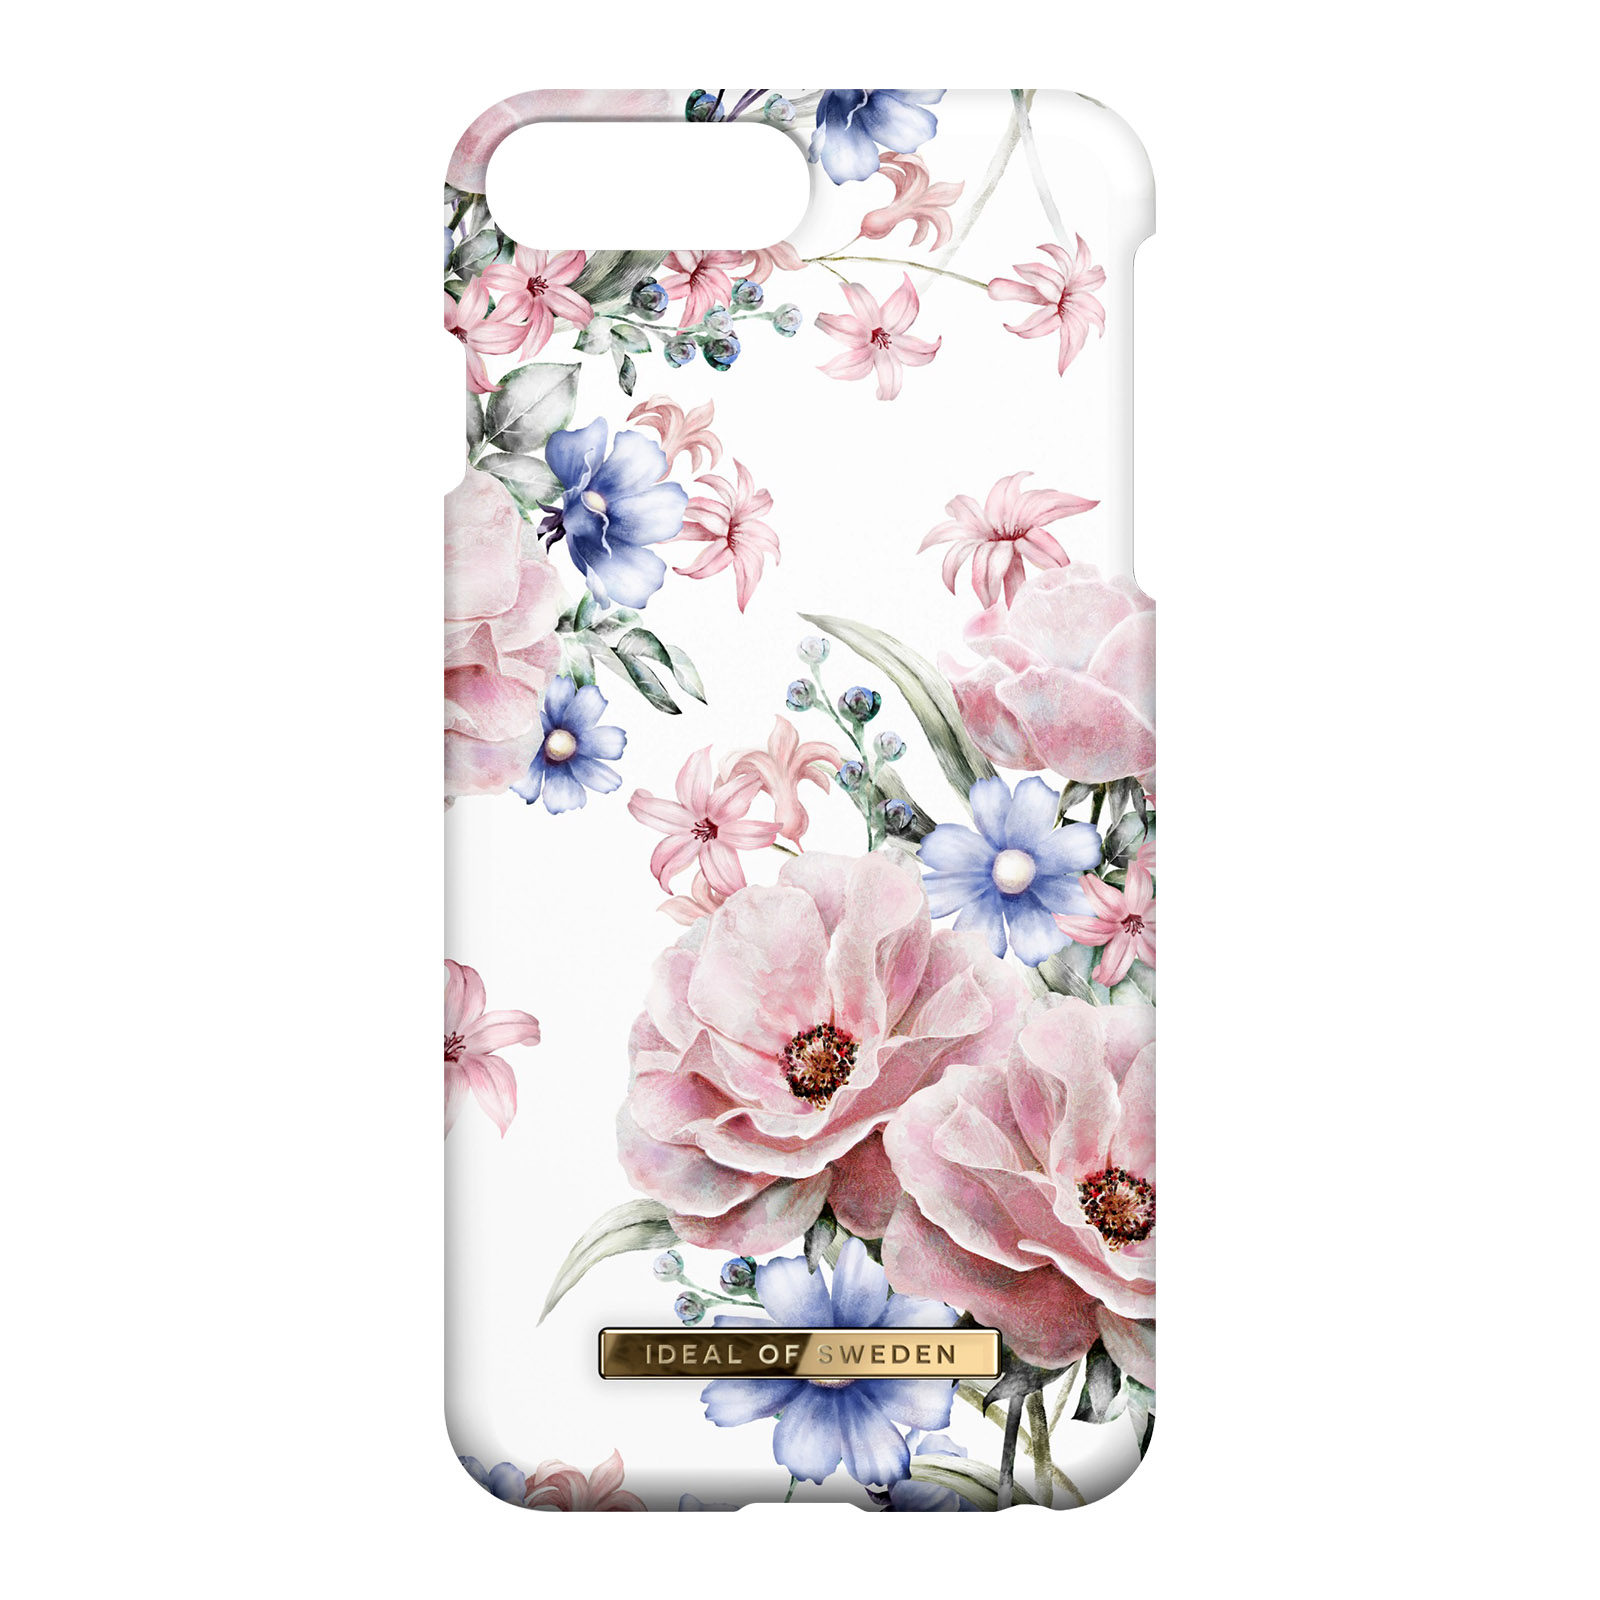 IDEAL OF SWEDEN Floral Apple, 8 iPhone Series, Plus, Rosa Backcover, Romance